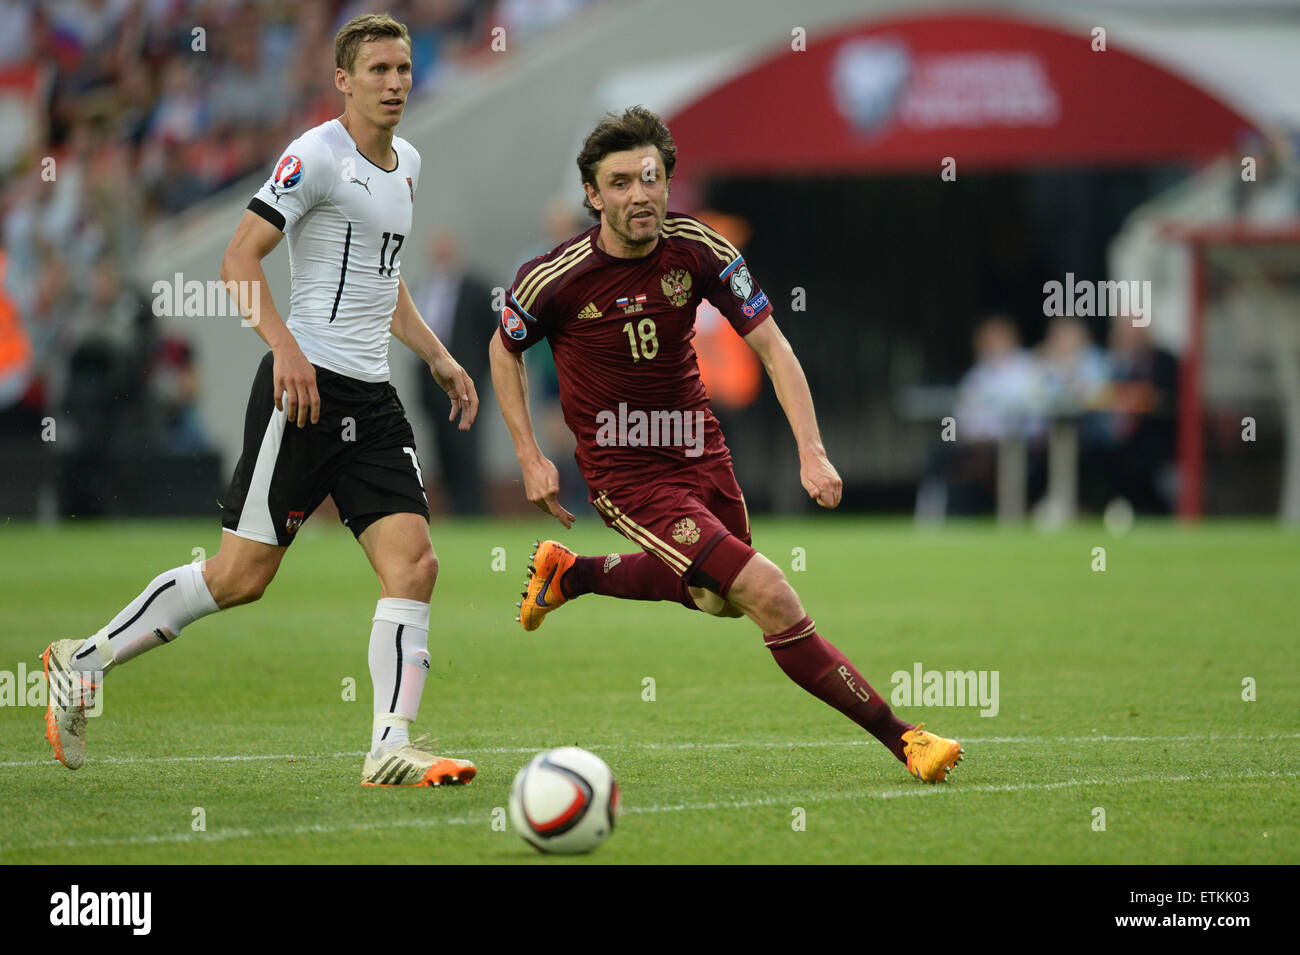 Moscow, Russia. 14th June, 2015. Yury Zhirkov (R) of Russia competes during the UEFA Euro 2016 qualifying soccer match against Austria in Moscow, Russia, June 14, 2015. Russia lost 0-1. © Pavel Bednyakov/Xinhua/Alamy Live News Stock Photo